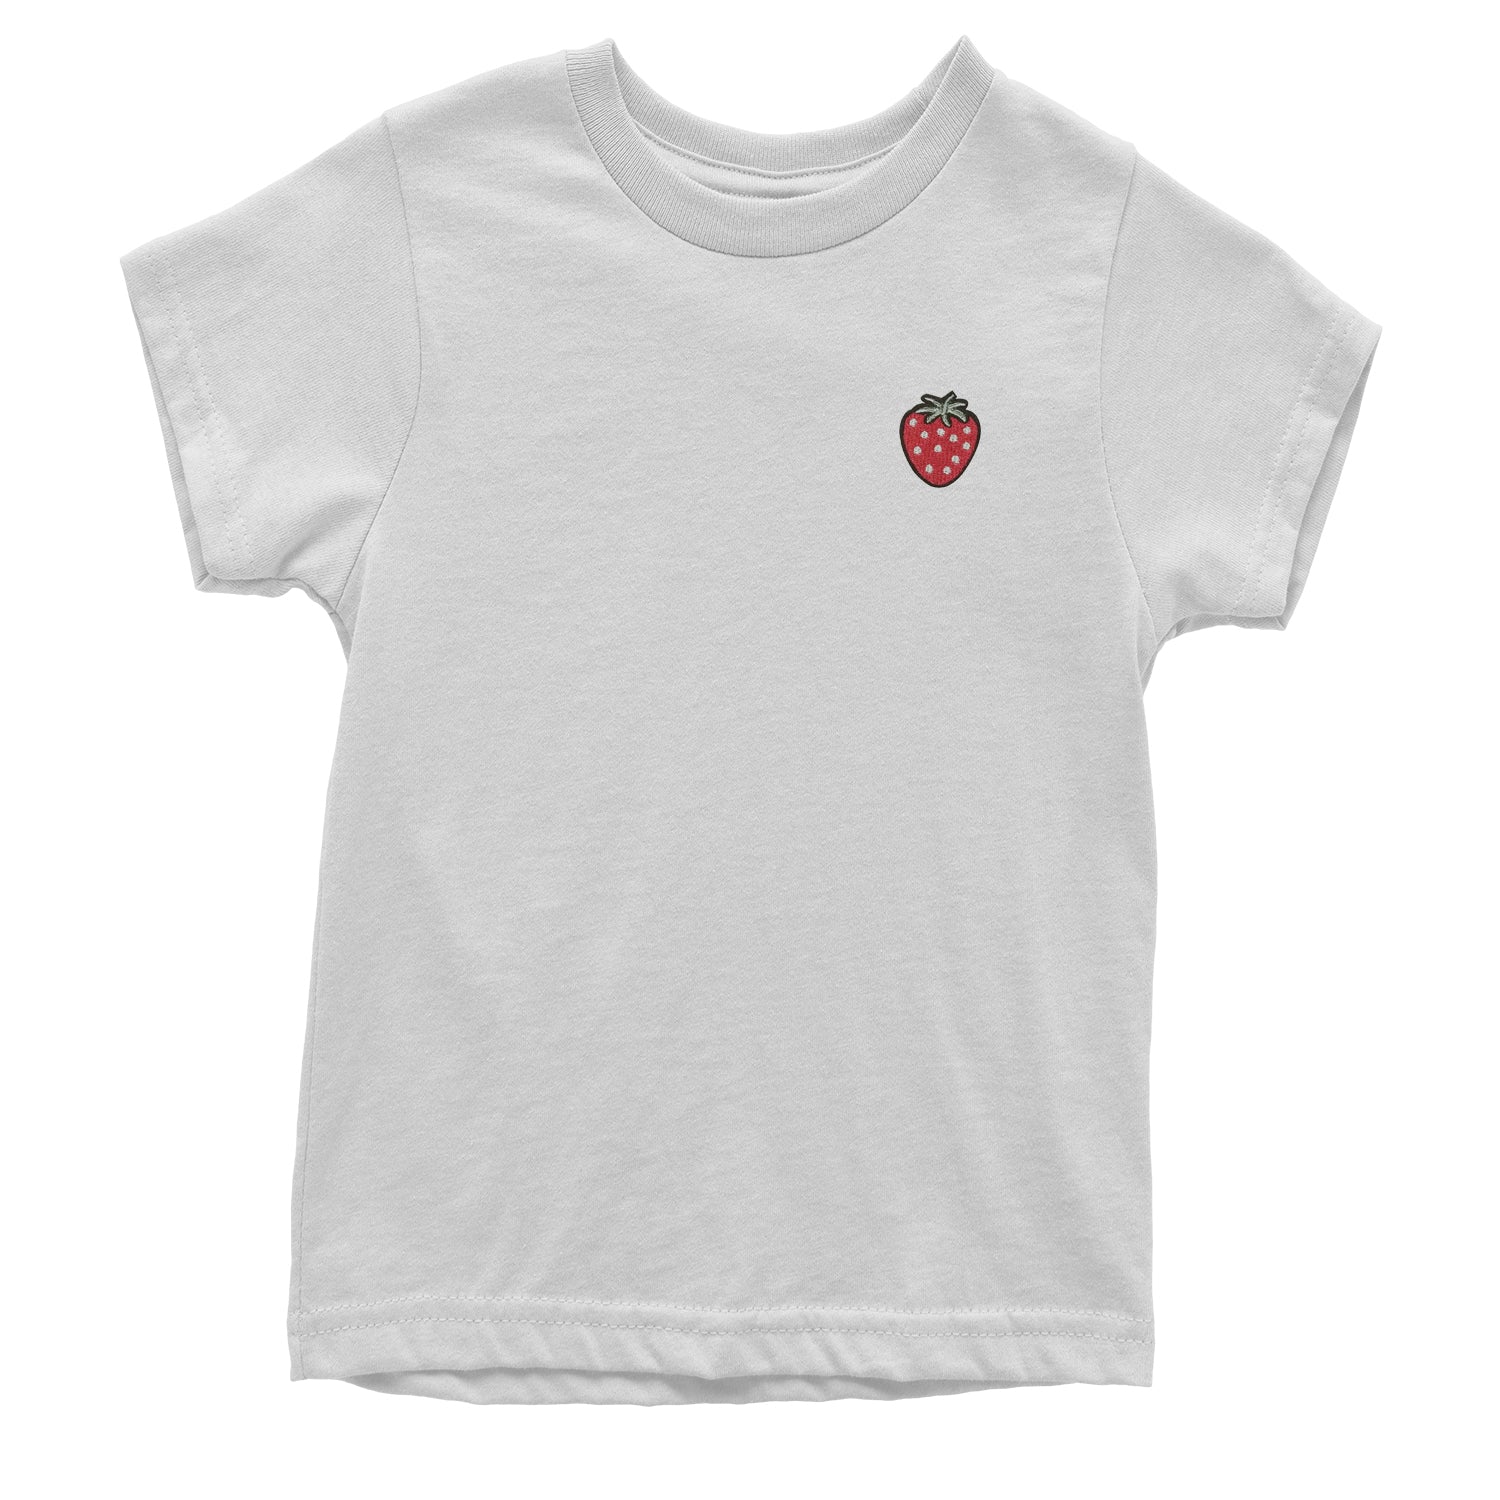 Embroidered Strawberry Patch (Pocket Print) Youth T-shirt fruit, strawberries by Expression Tees